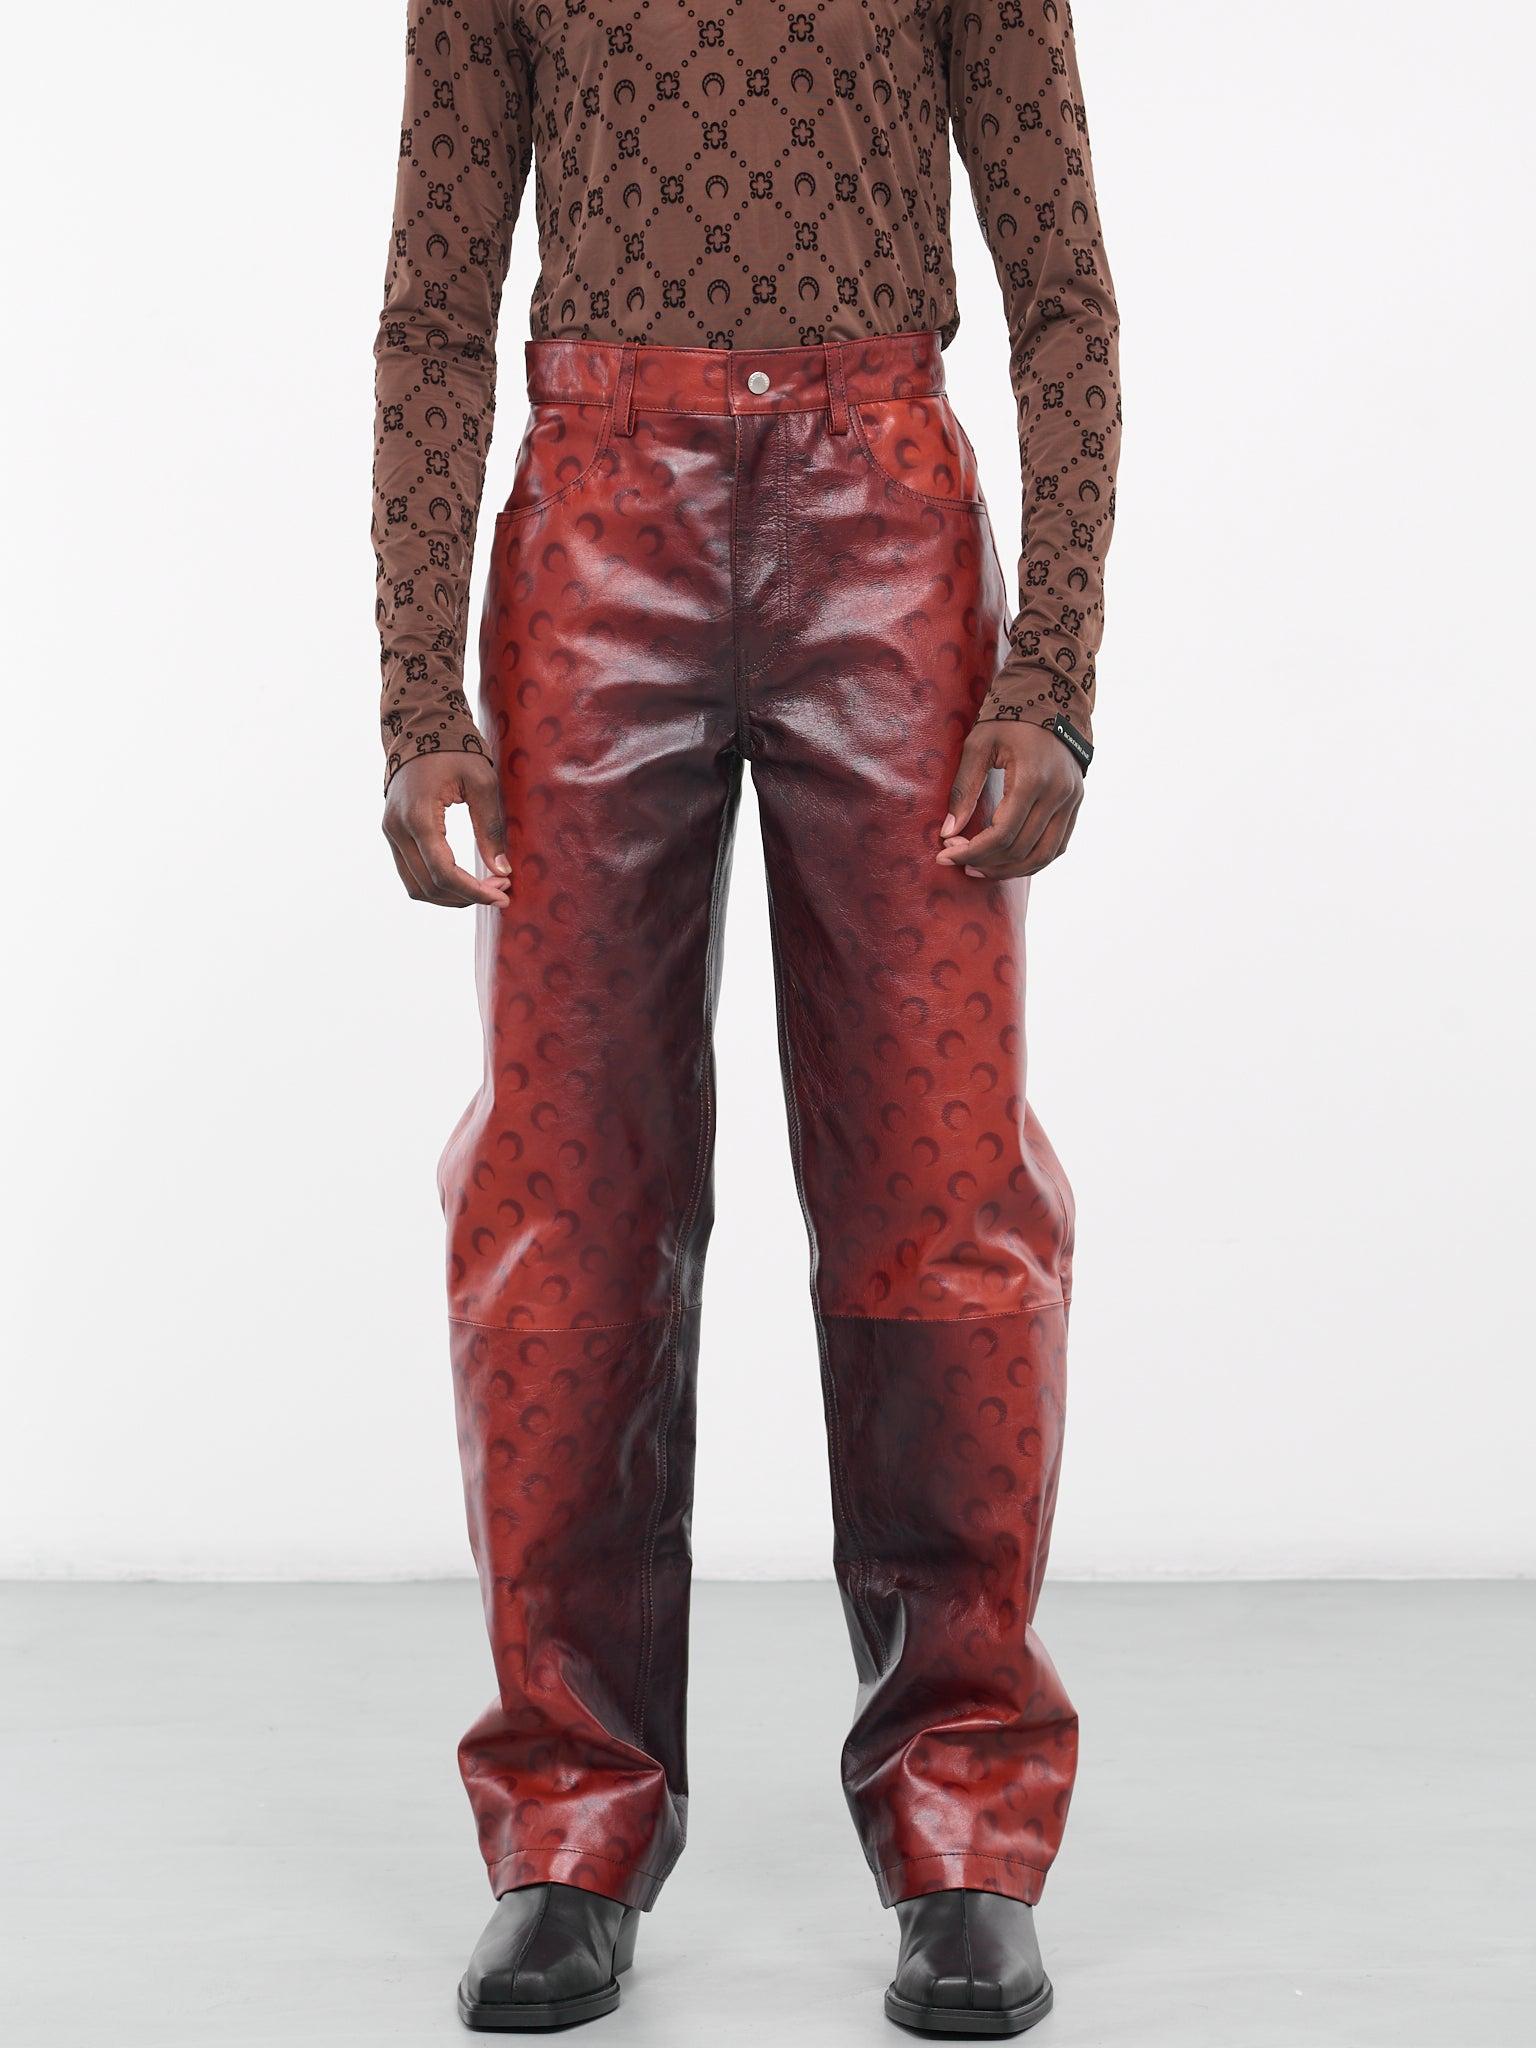 Marine Serre Airbrushed Leather Pants in Red for Men | Lyst